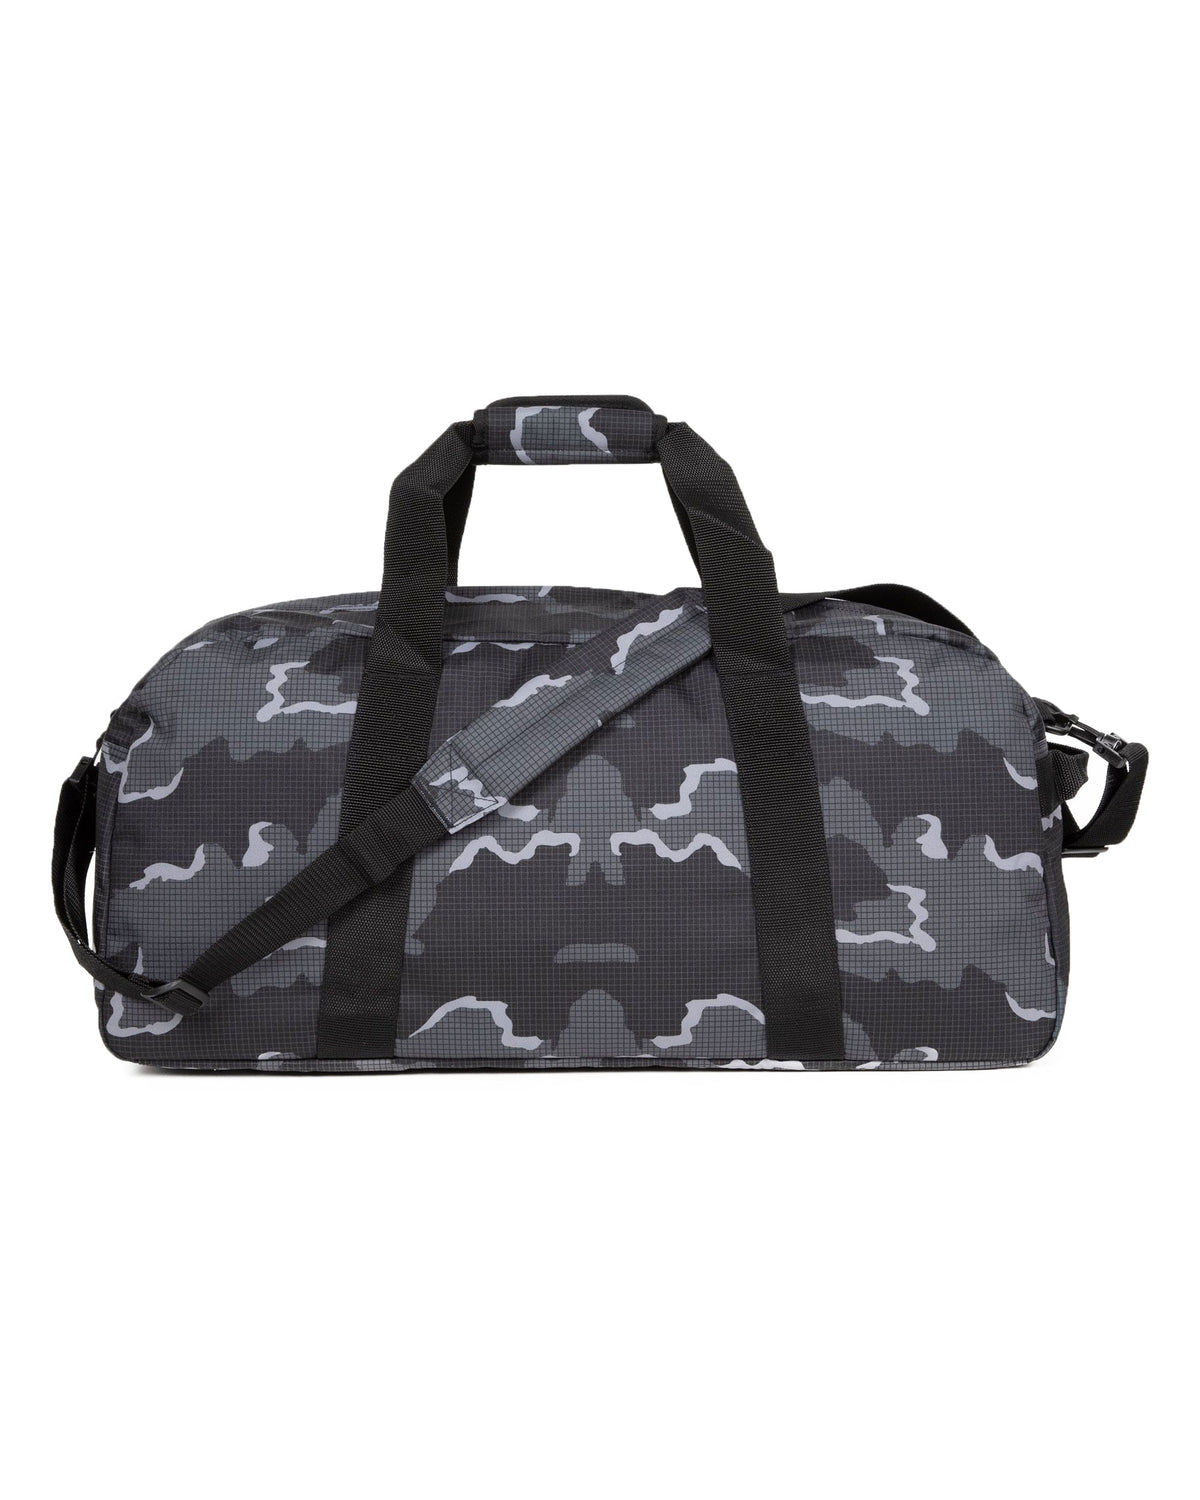 Undercover X Eastpak Stand Uc Black Camo Bag